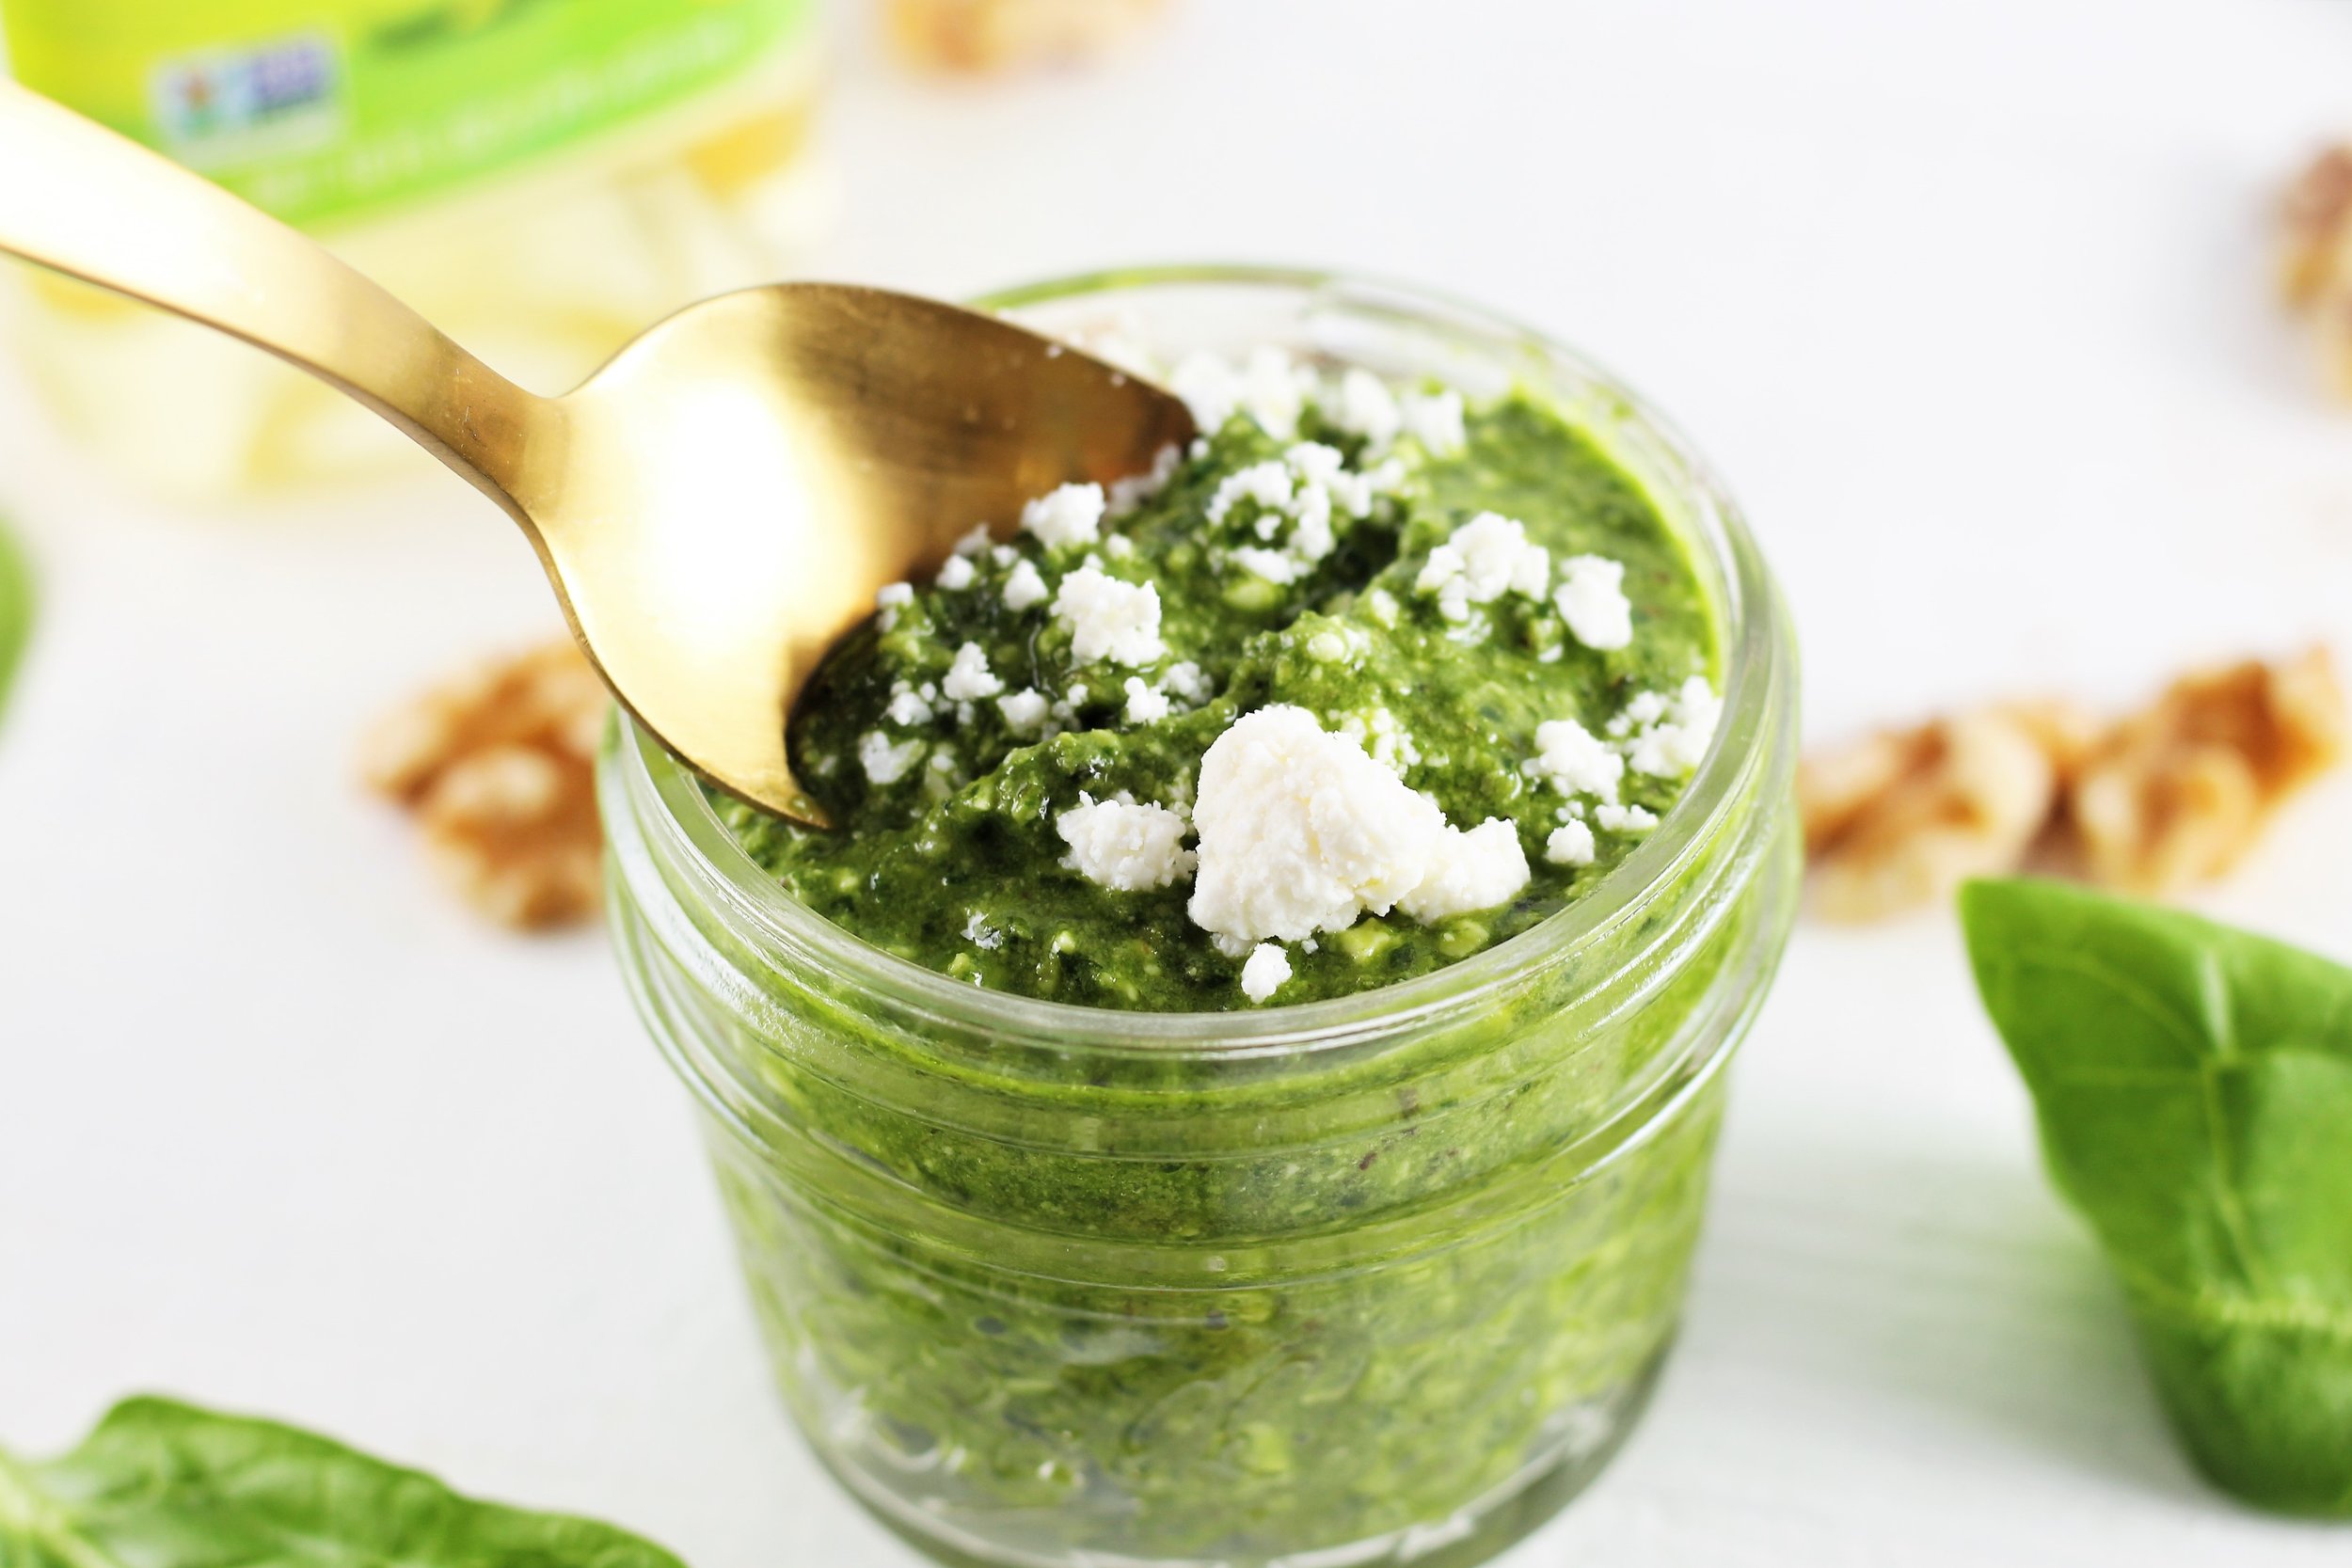  This pesto sauce goes great on EVERYTHING! Literally! Try it on salmon, pasta, chicken salad, toast, etc.  